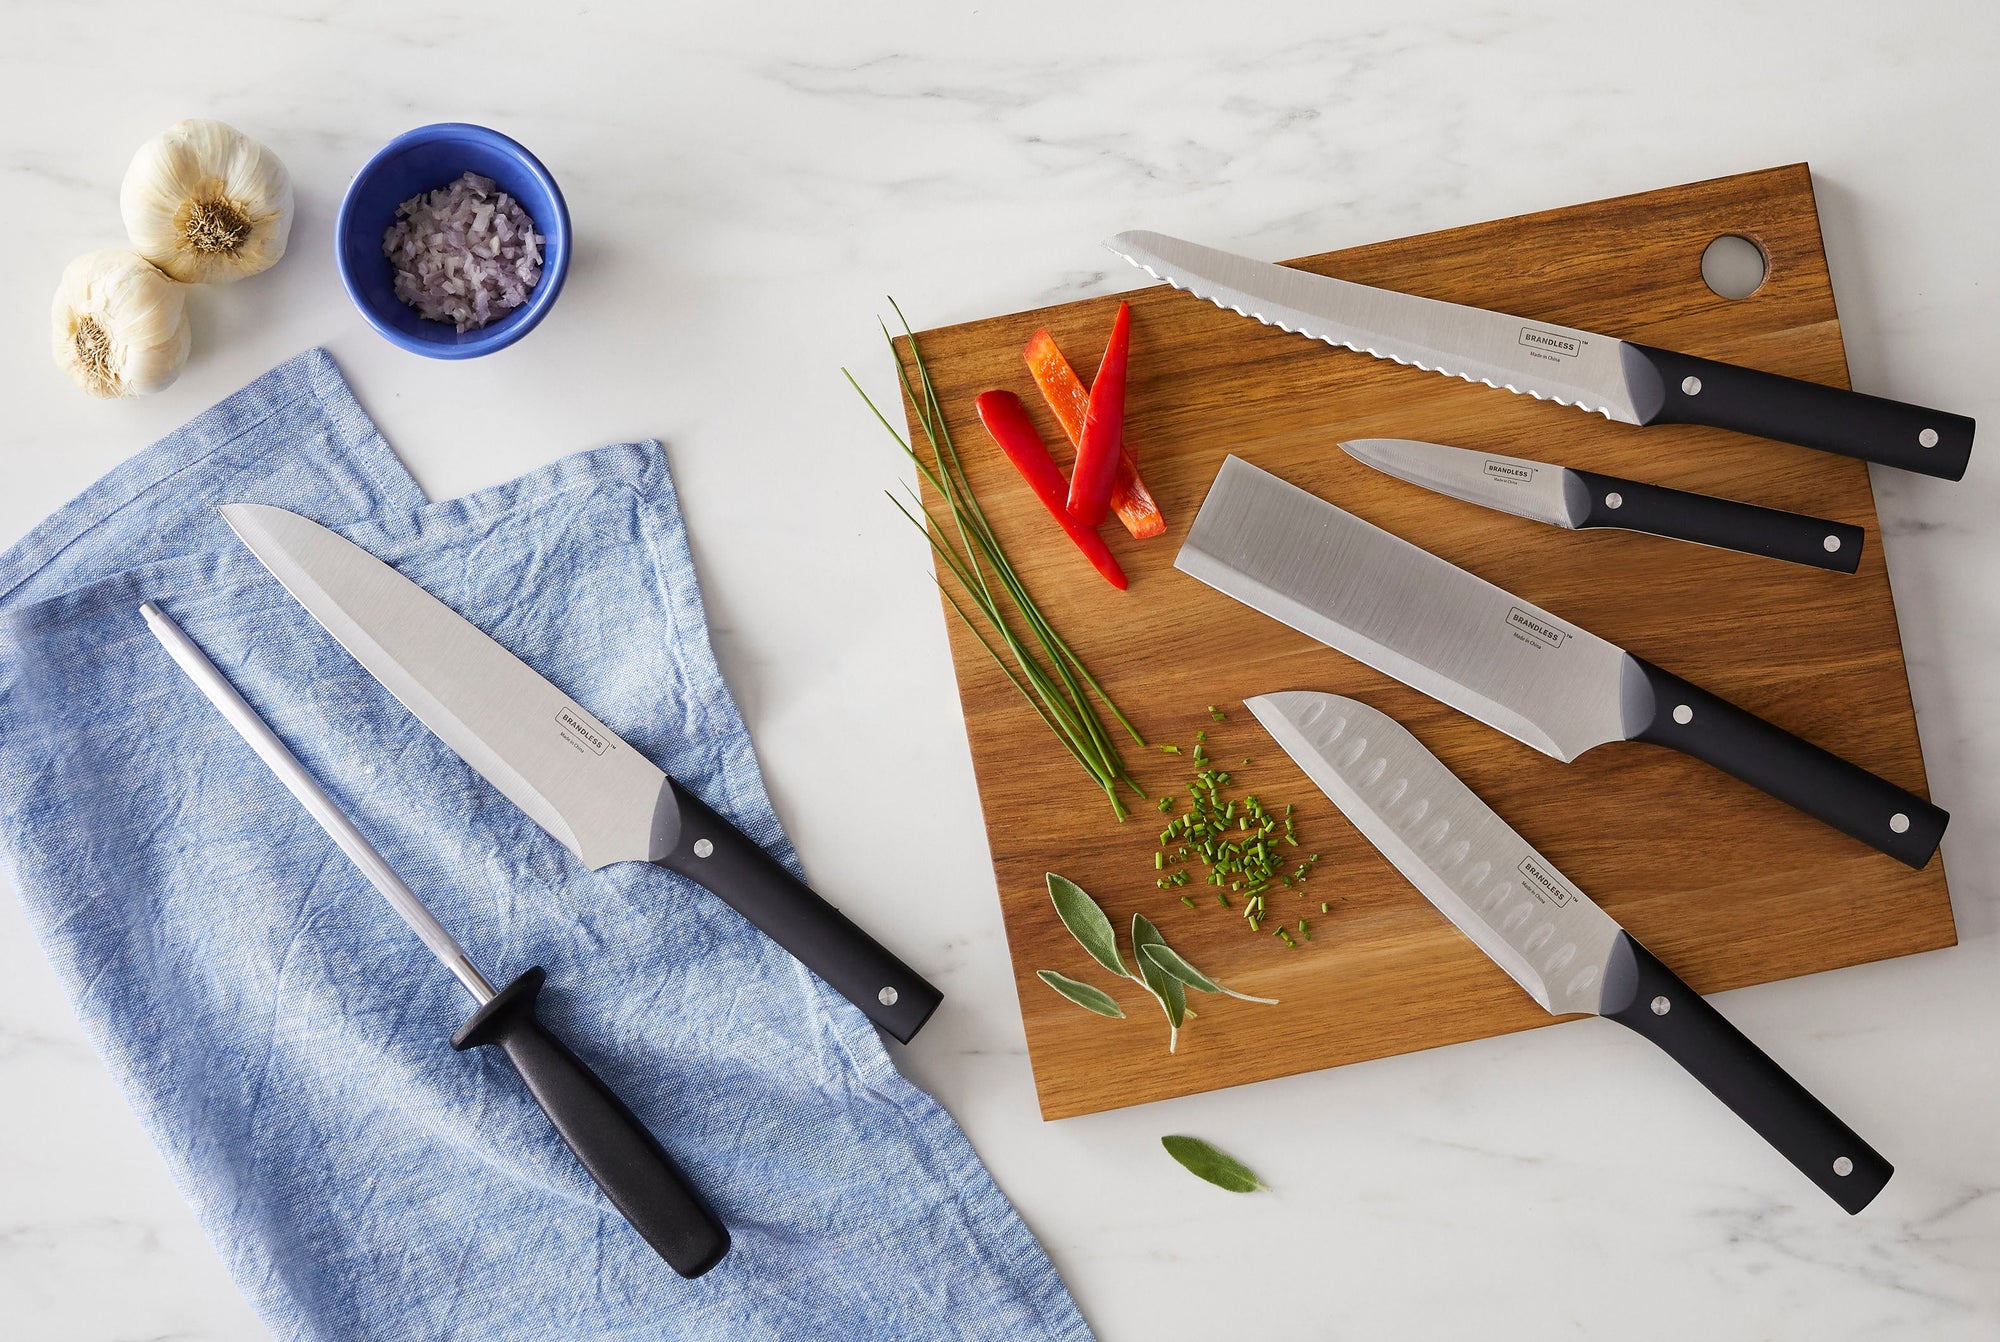 Lifestyle image of an array of kitchen knives laying on a cutting board next to some spices, sprigs, and peppers.